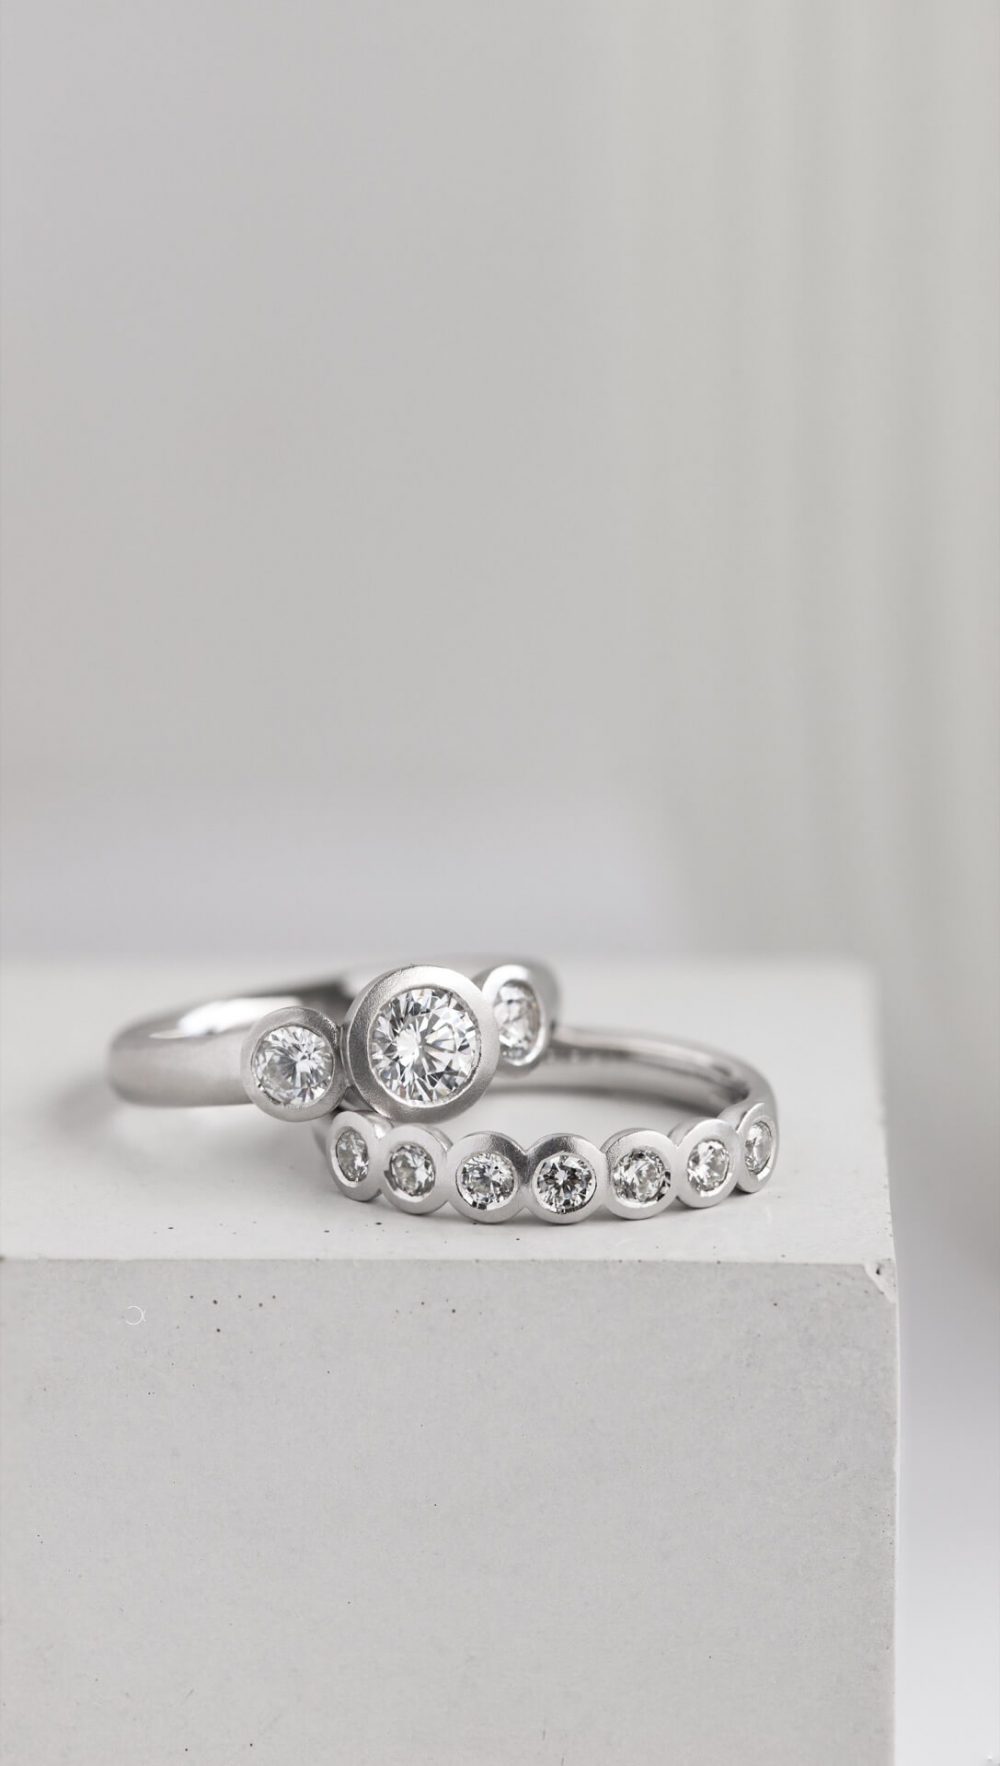 5 unique diamond ring designs to choose from for an engagement in 2021